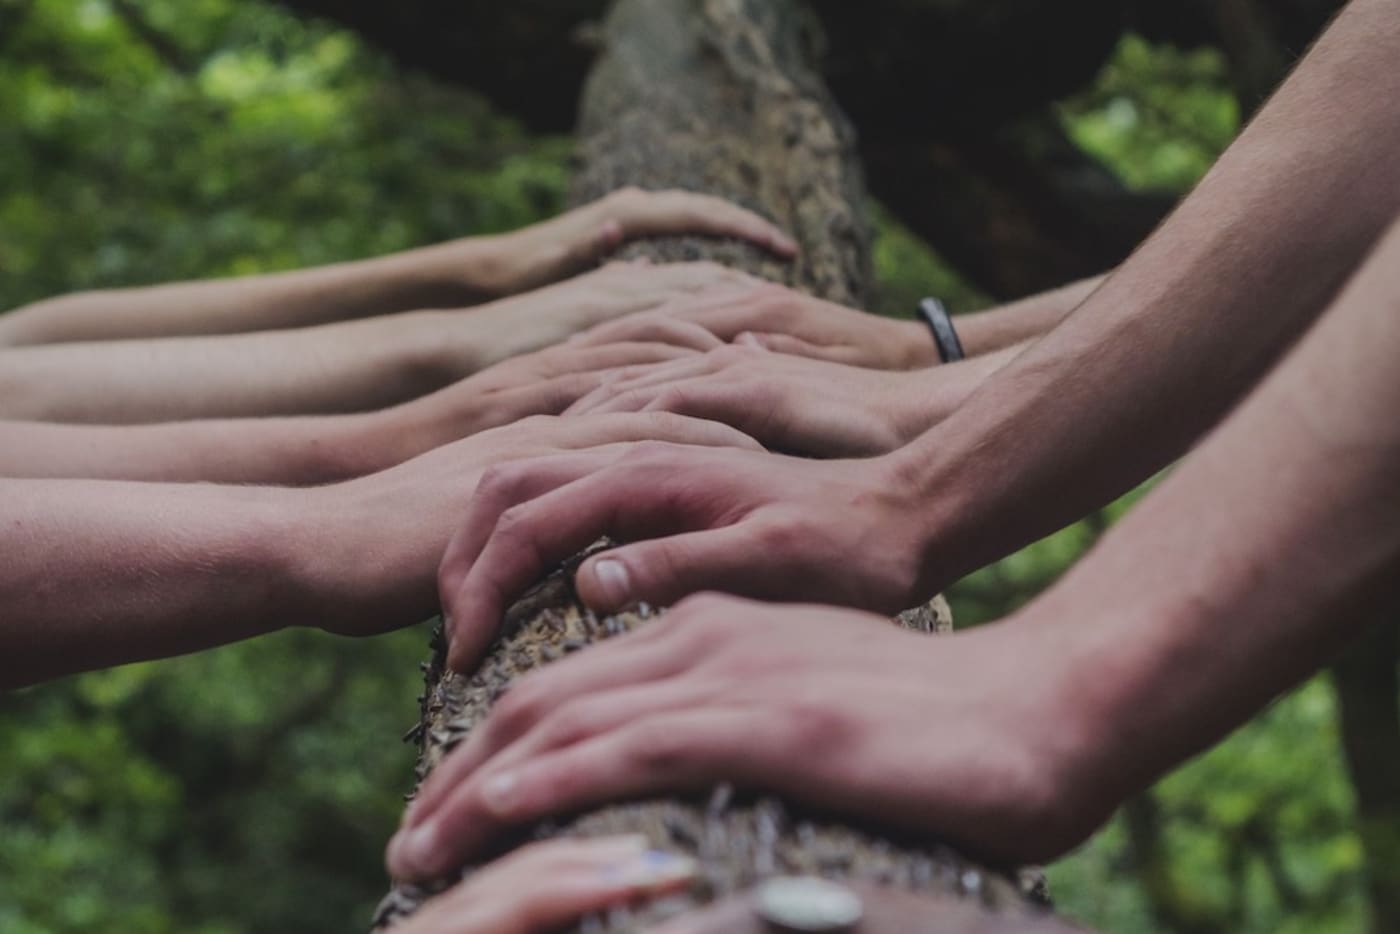 Working together hands on a tree